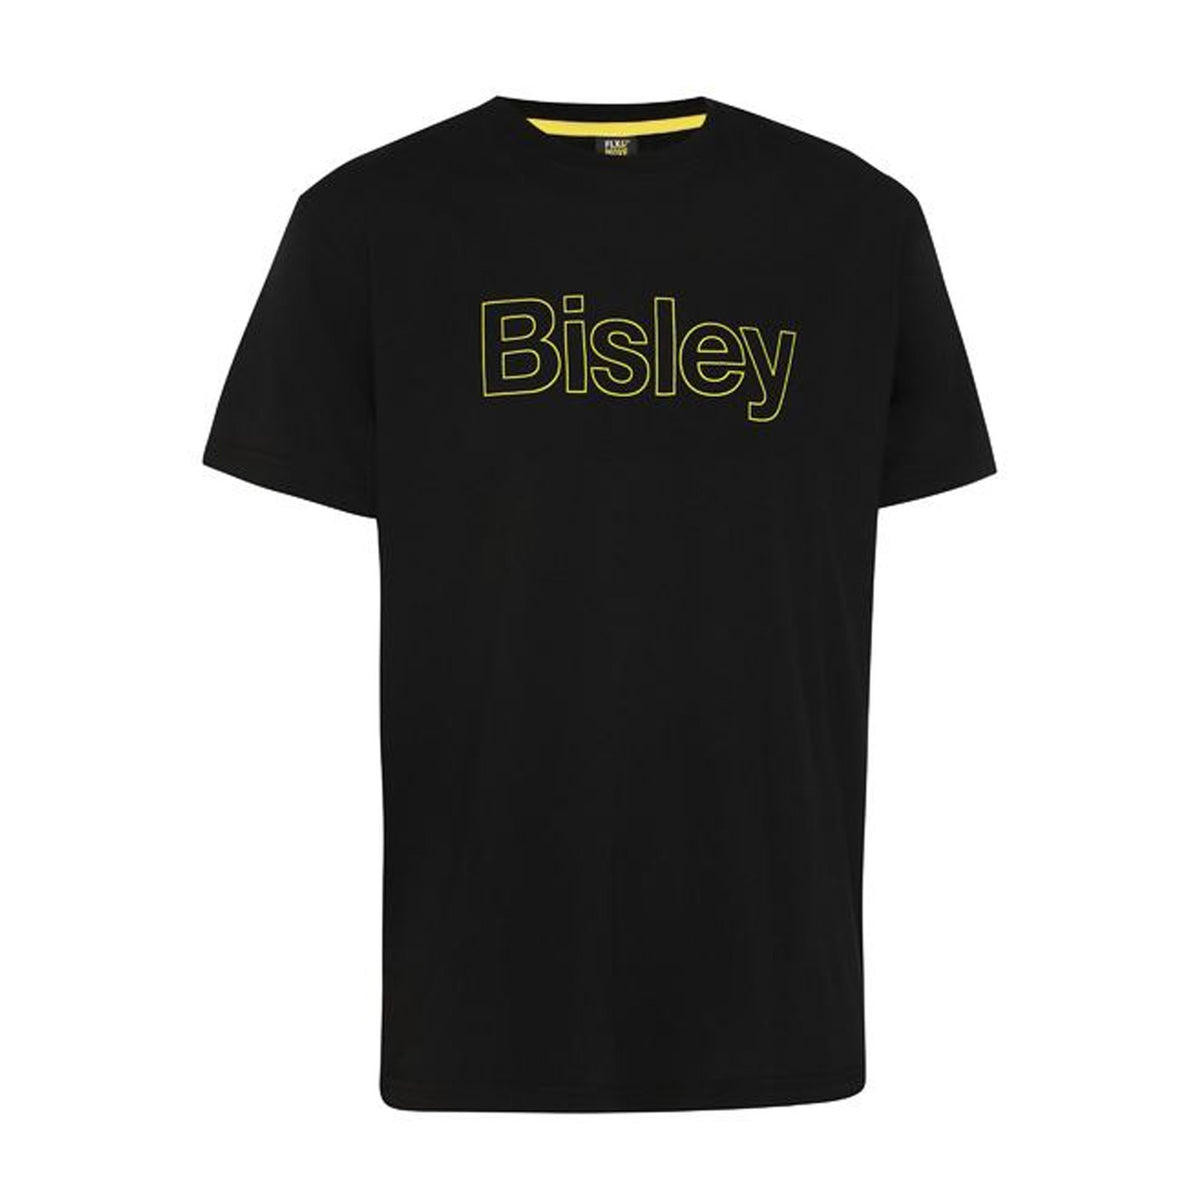 bisley cotton outline logo tee in black yellow